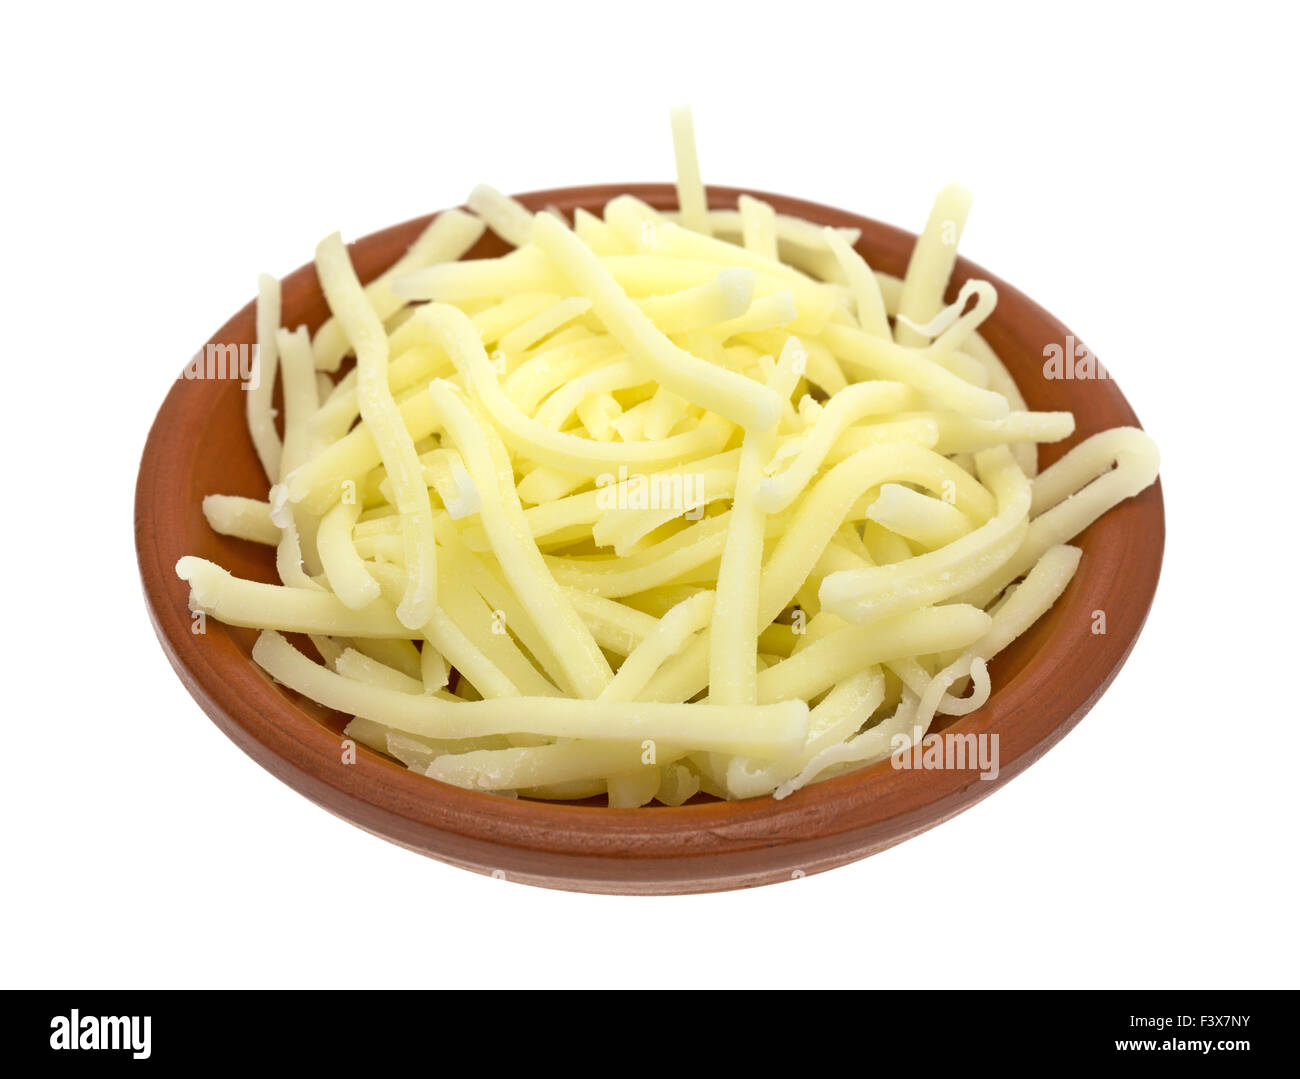 https://c8.alamy.com/comp/F3X7NY/a-portion-of-natural-mild-cheddar-cheese-in-a-small-bowl-isolated-F3X7NY.jpg